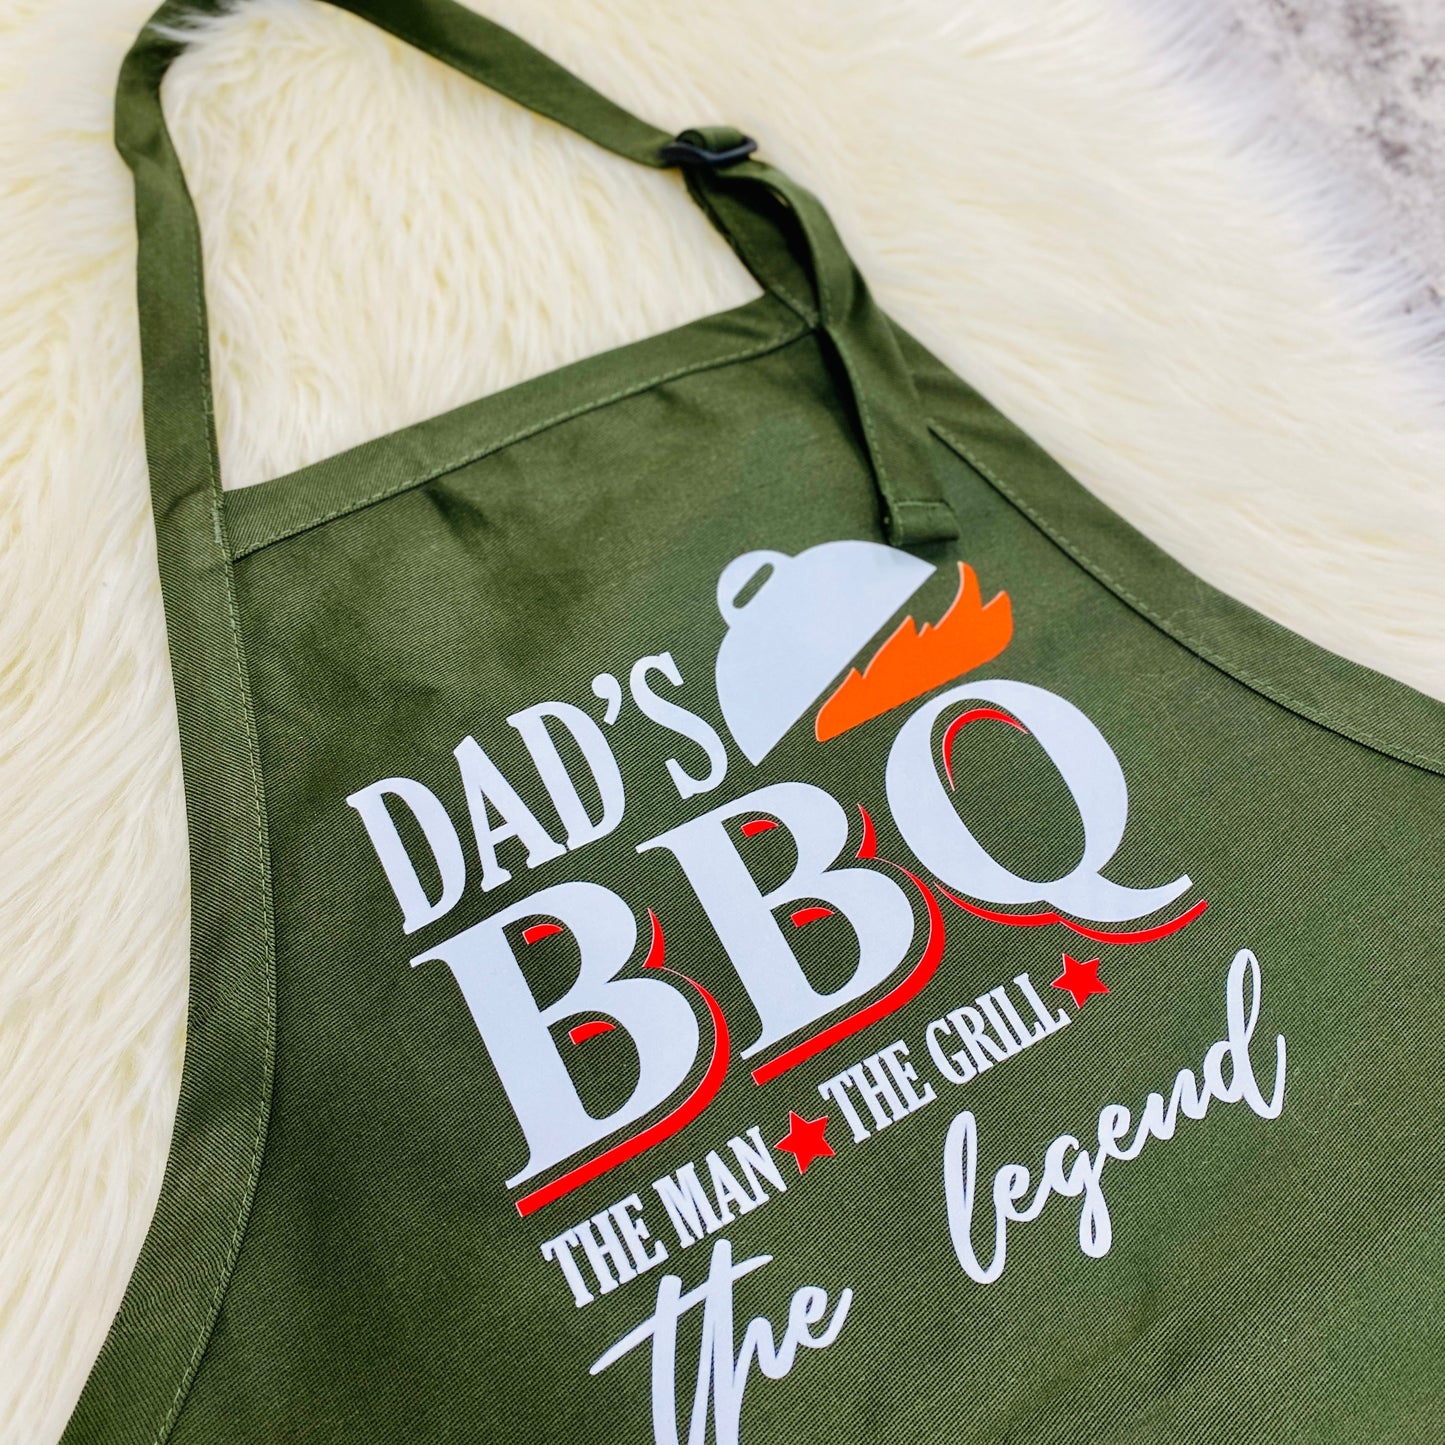 Dad's BBQ The Man The Grill The Legend Green Apron